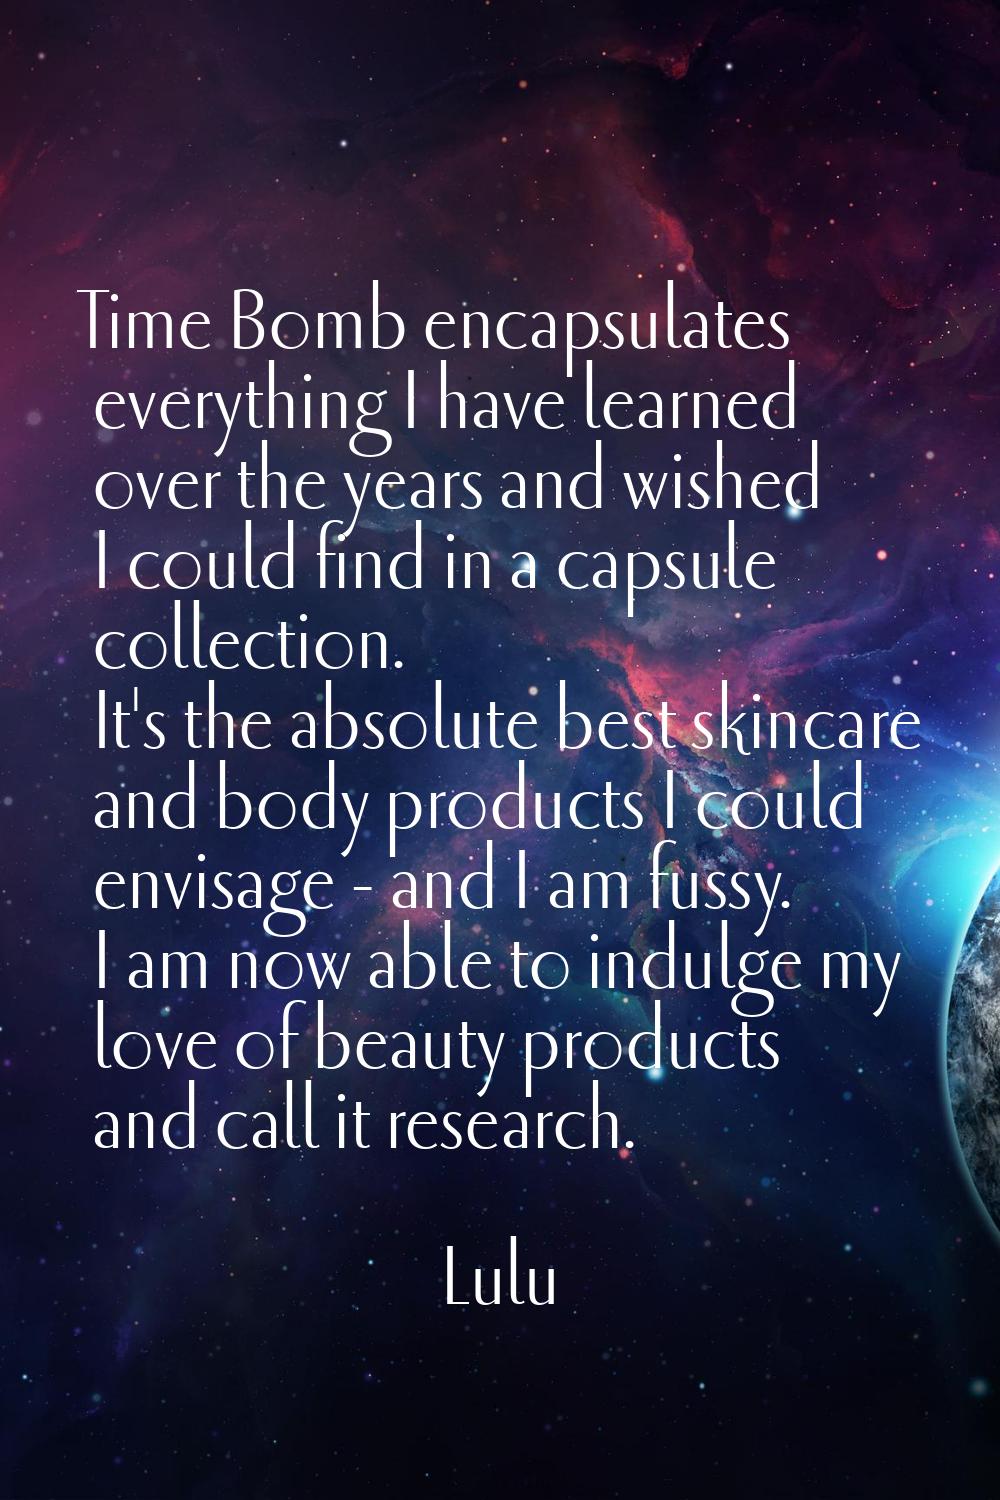 Time Bomb encapsulates everything I have learned over the years and wished I could find in a capsul